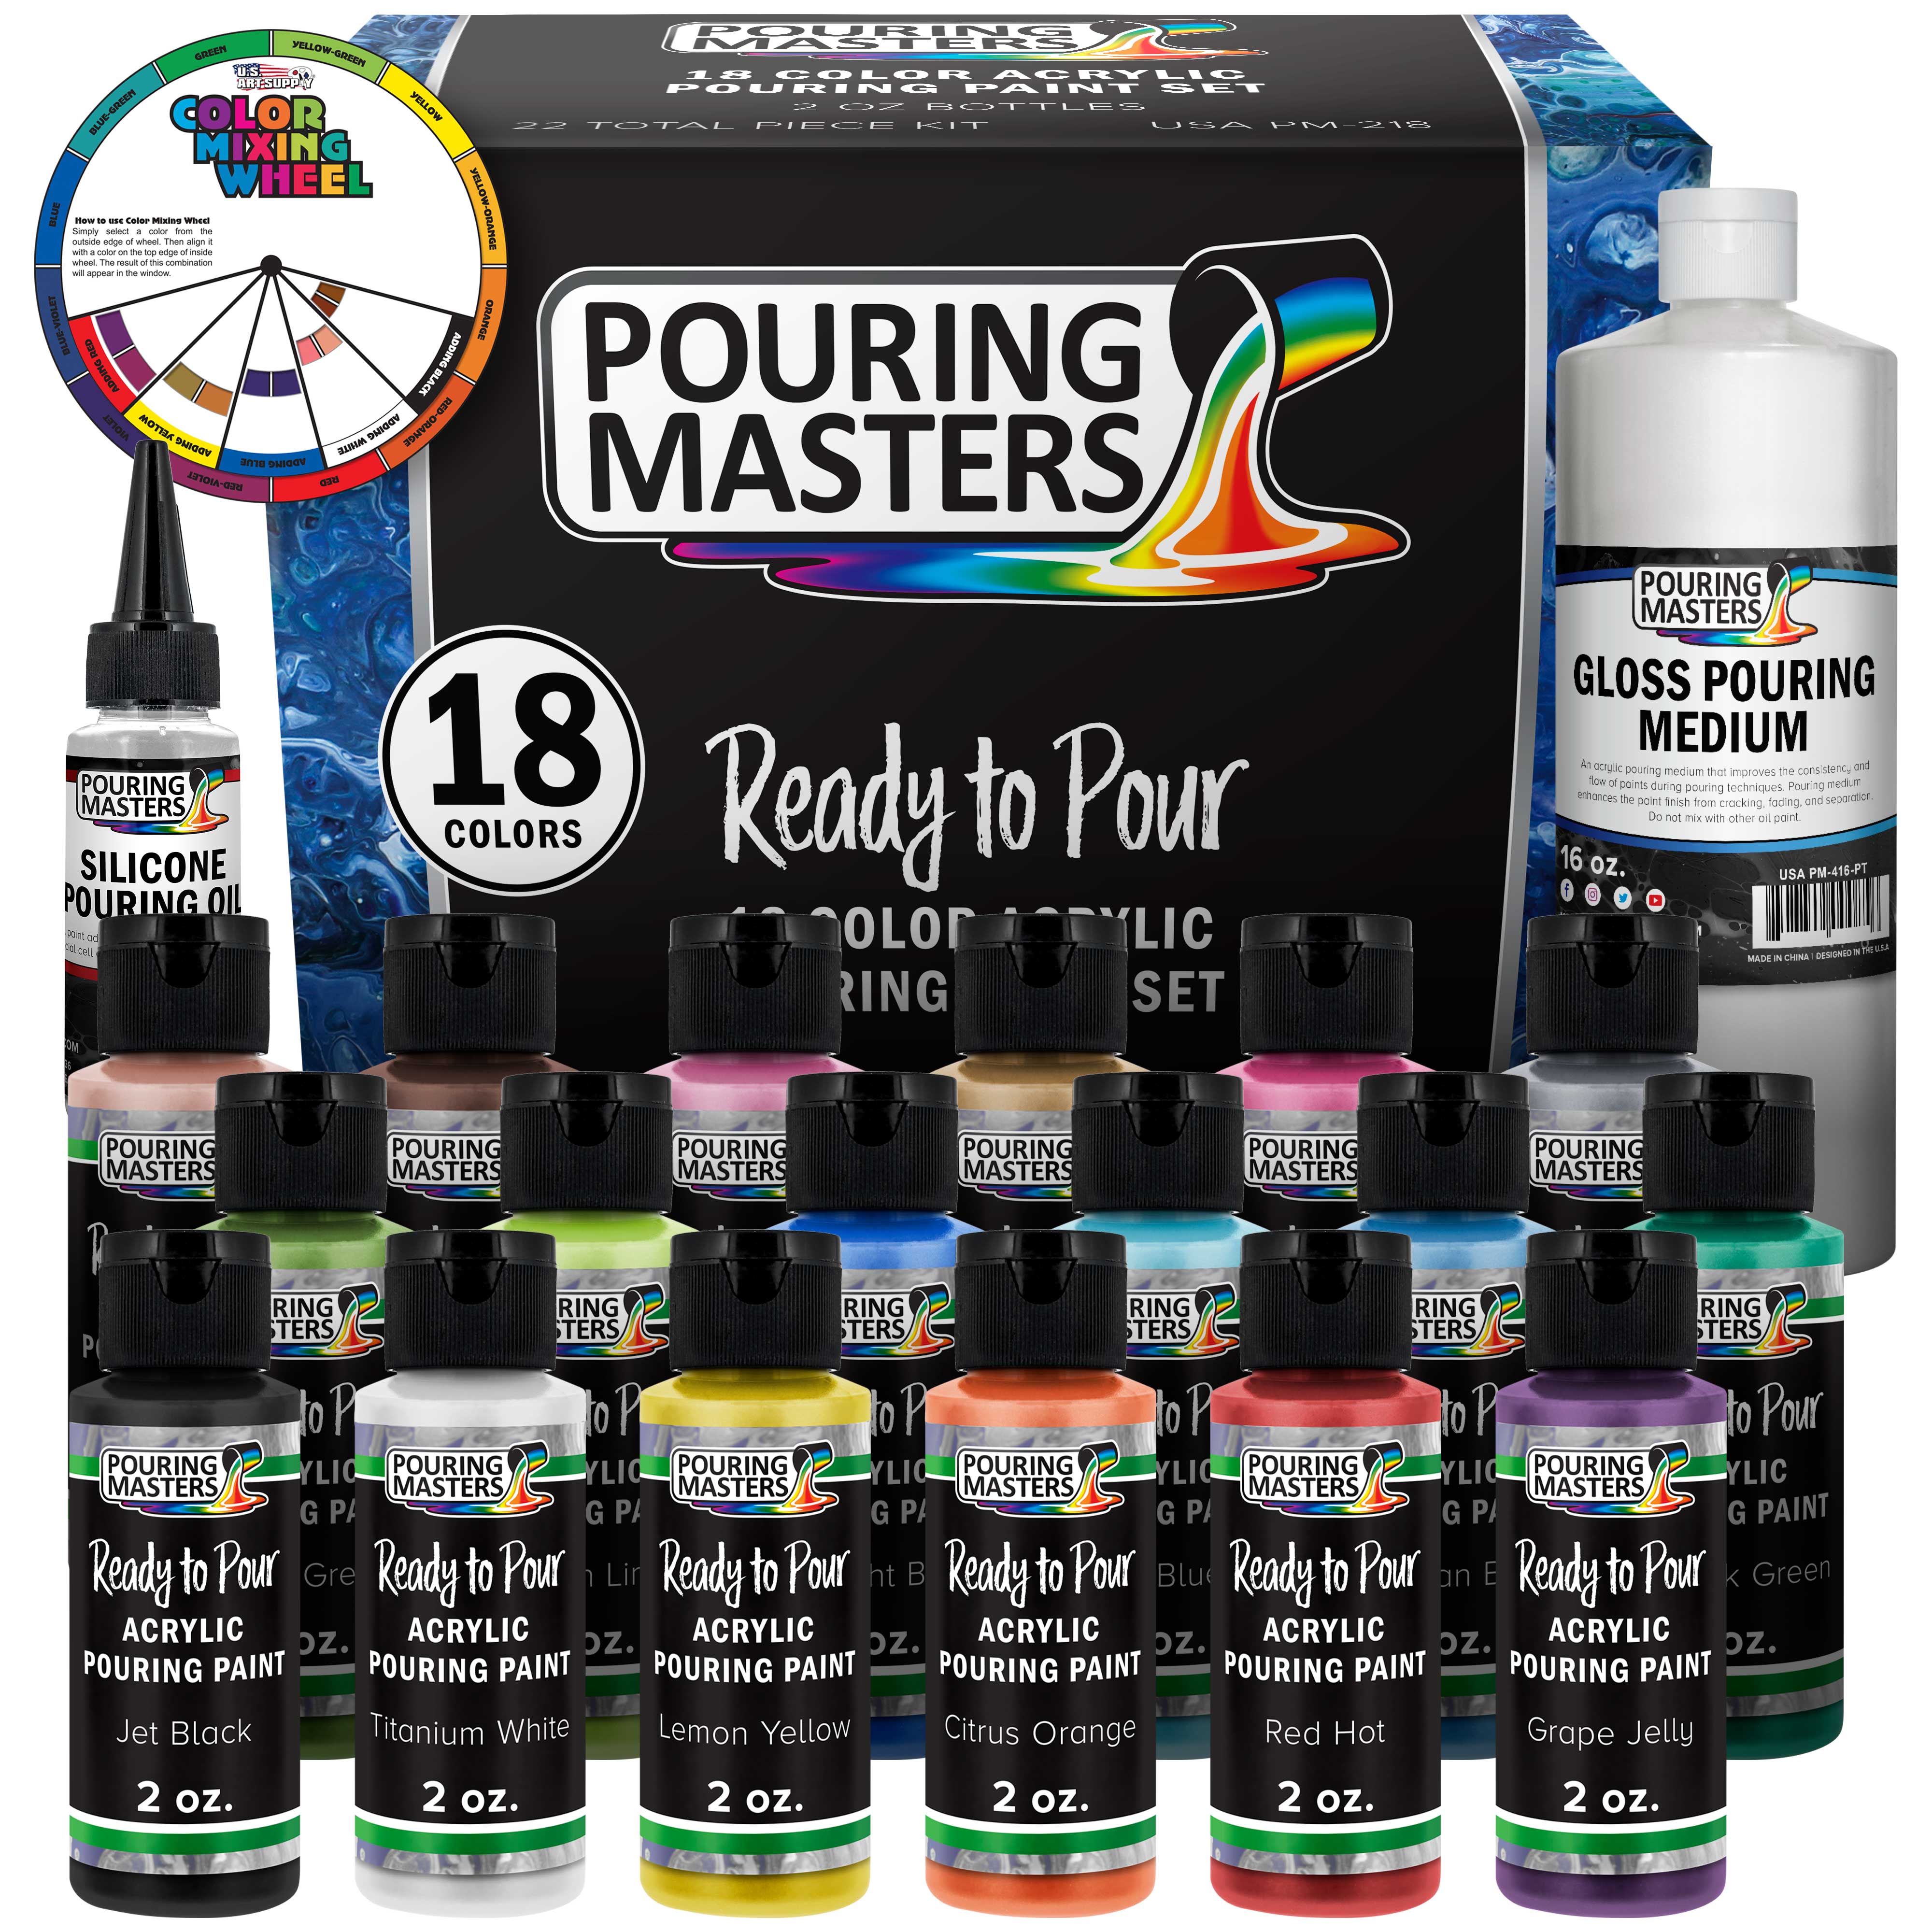 18 Color Ready to Pour Acrylic Pouring Paint Set - Premium Pre-Mixed High Flow 2-Ounce Bottles - for Canvas, Wood, Paper, Crafts, Tile, Rocks and More - image 1 of 7